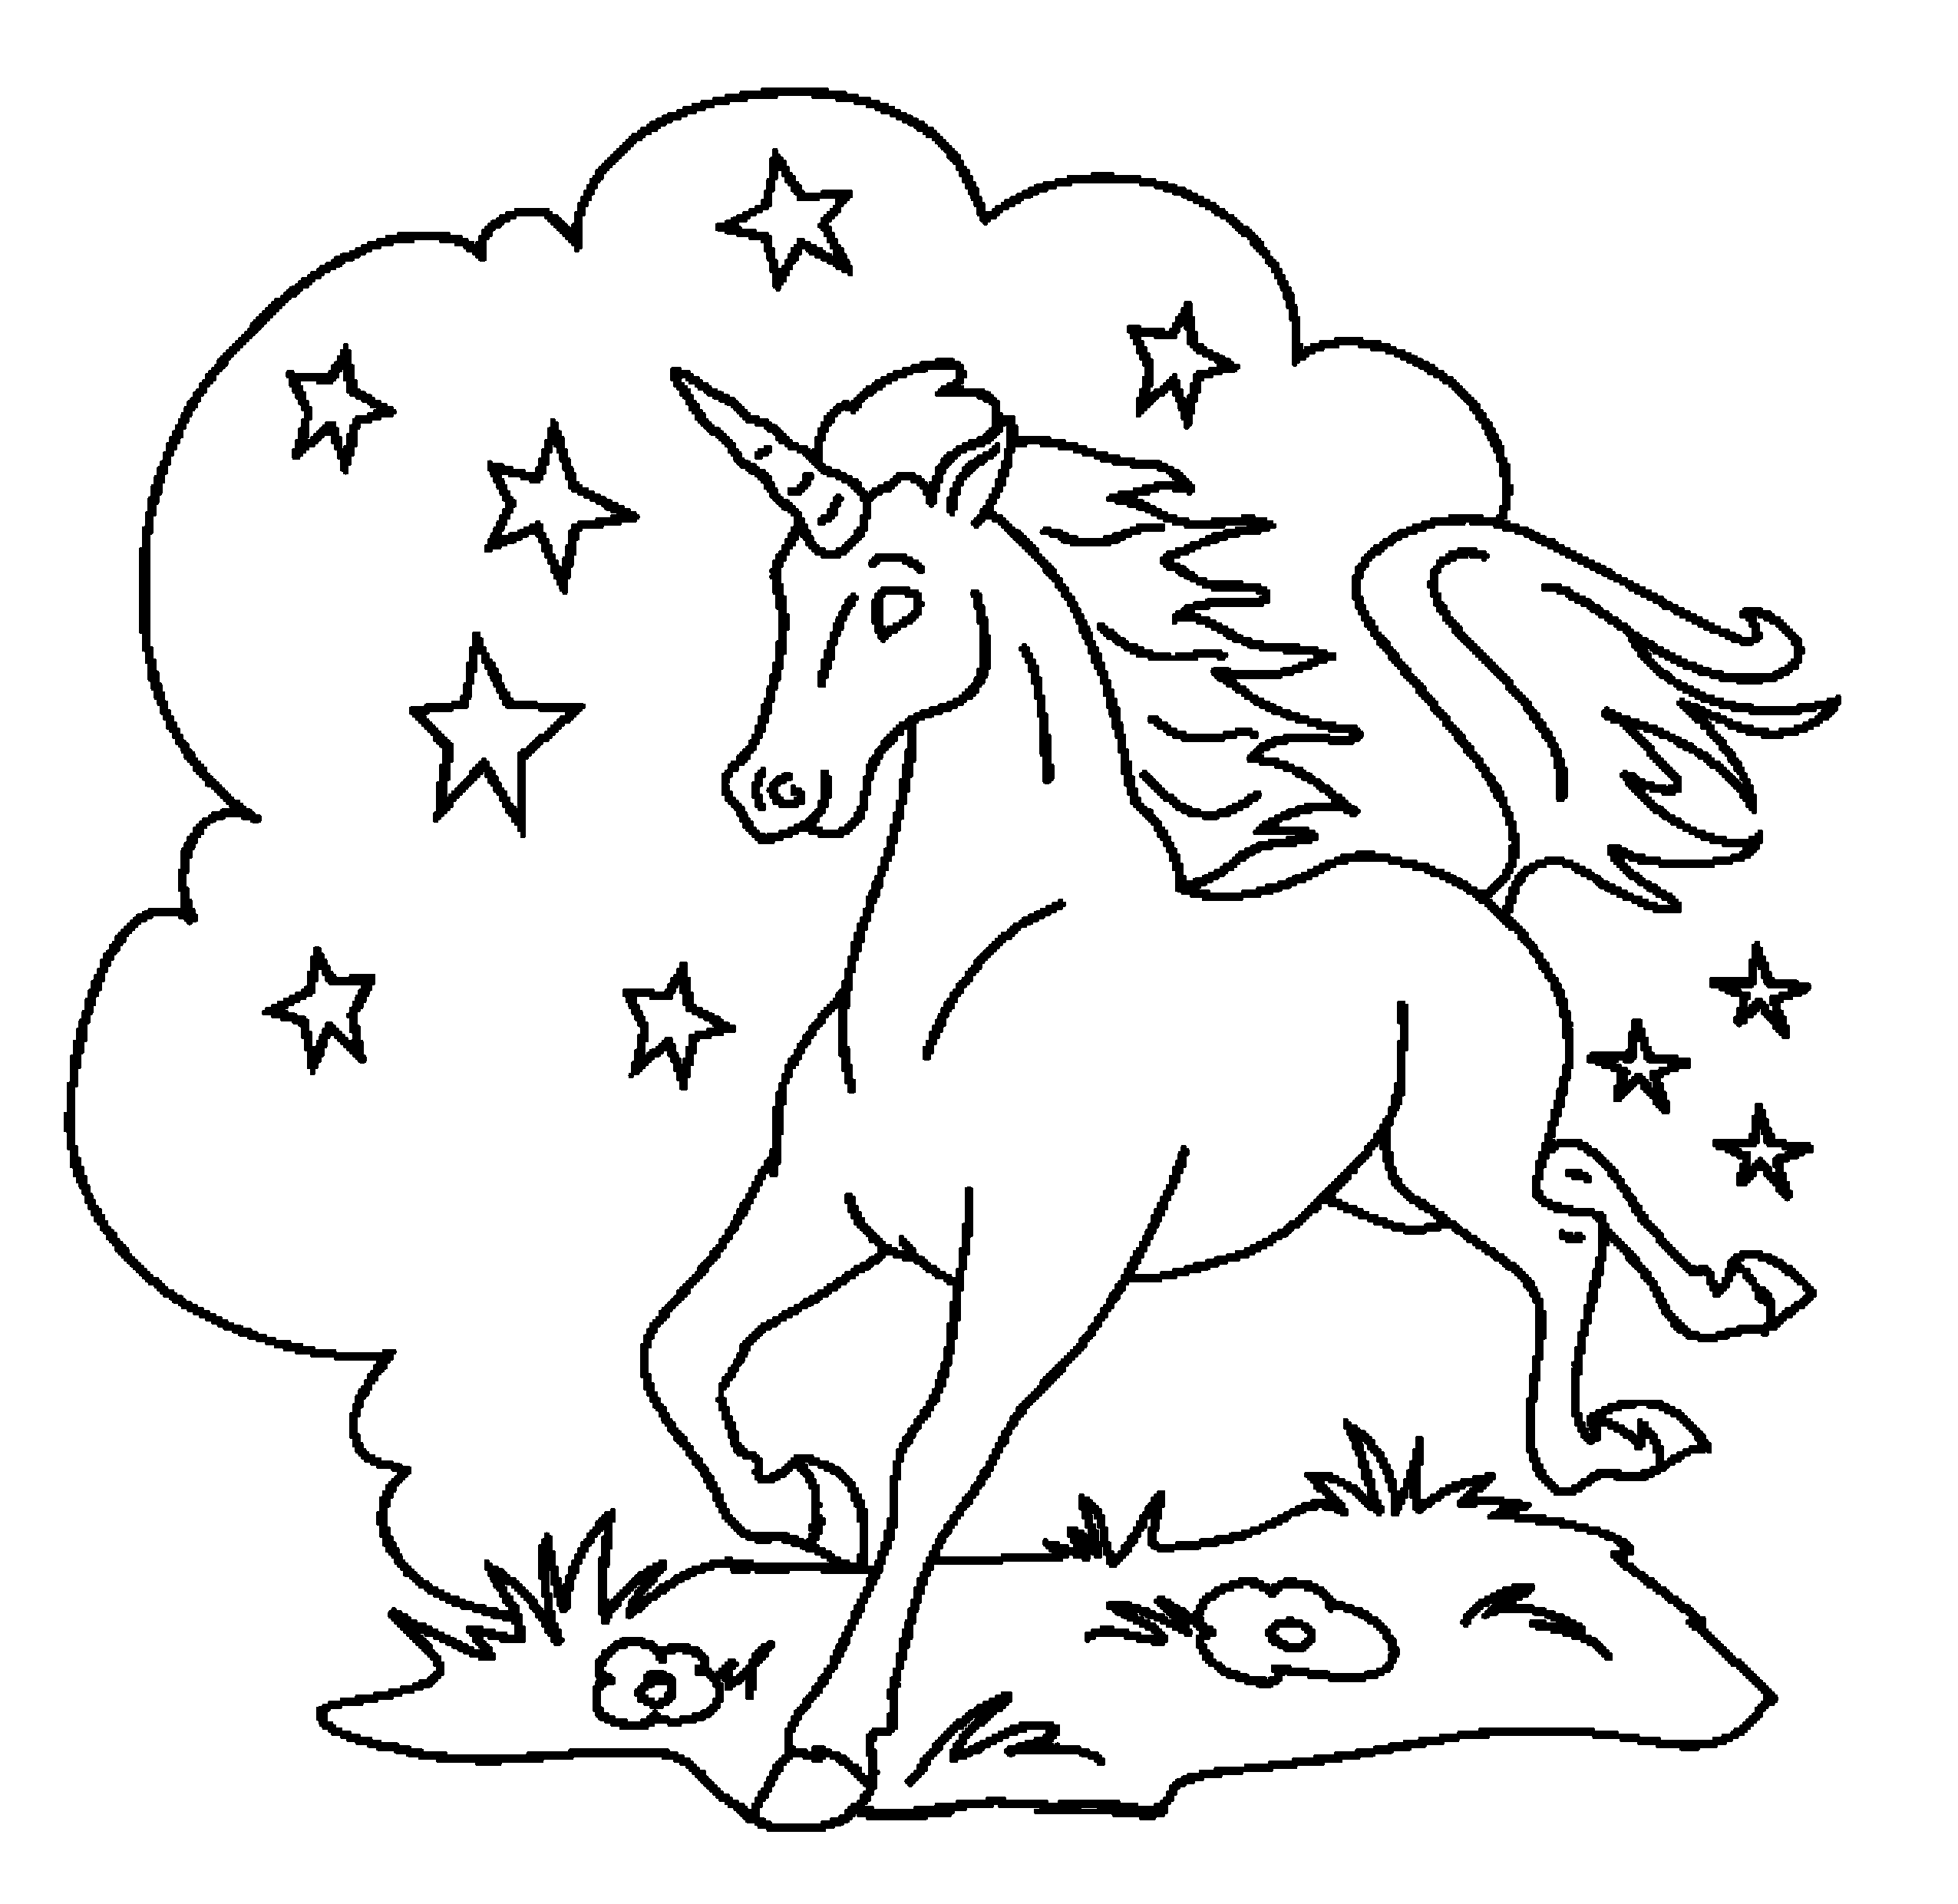 unicorn printable coloring pages mildred patricia baena coloring pages unicorn unicorn pages printable coloring 